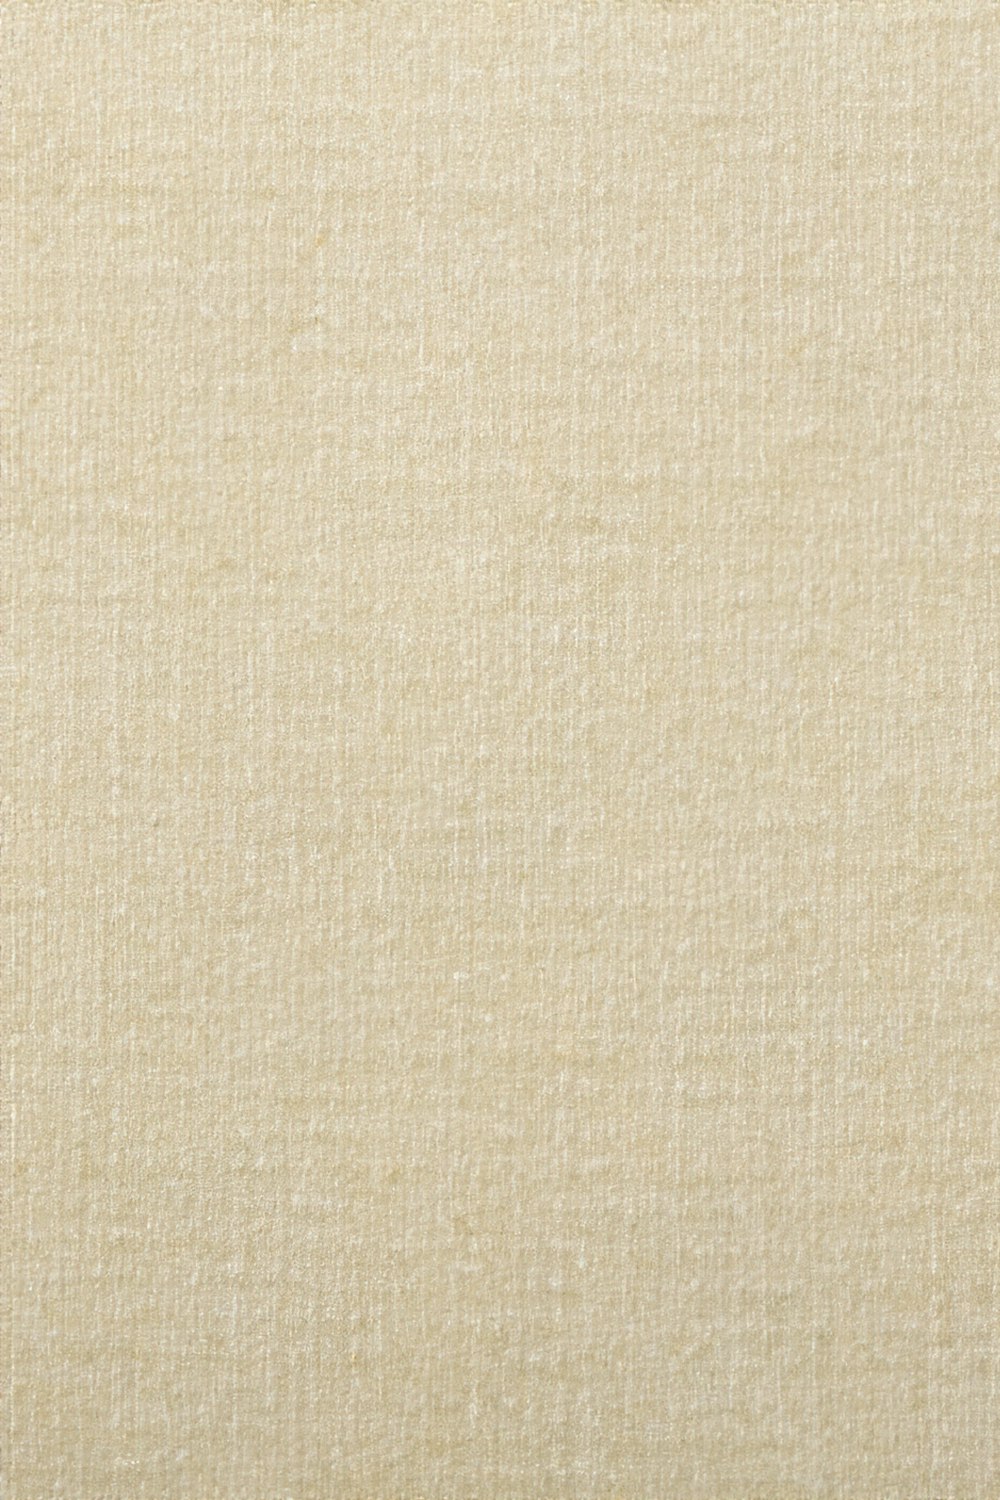 a close up of a beige fabric textured background